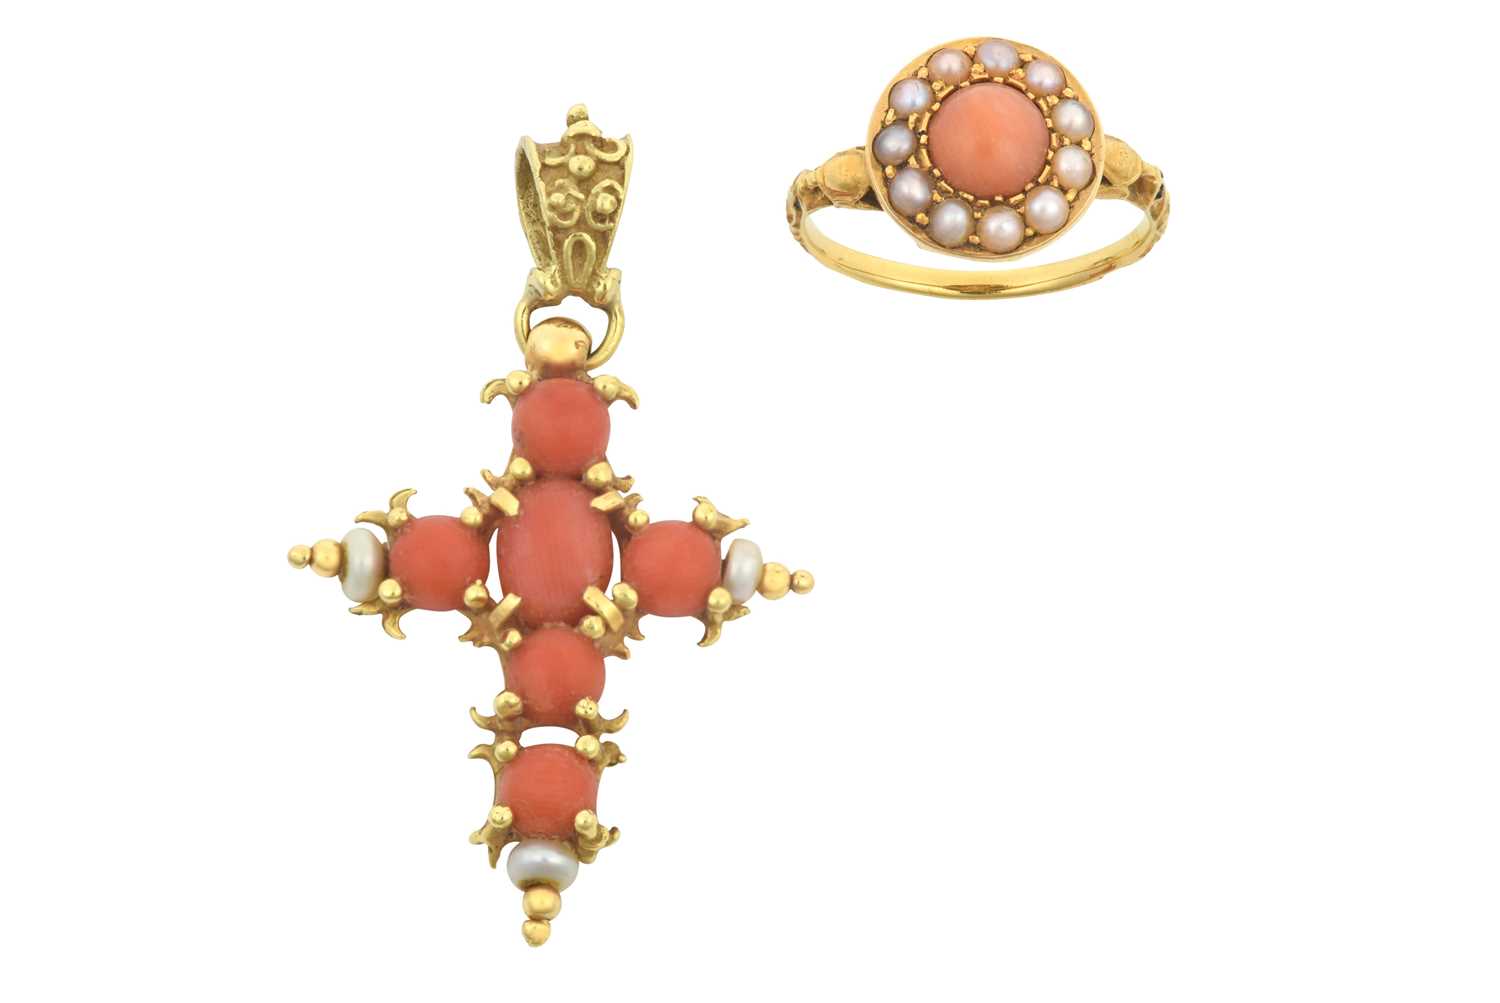 A Coral and Seed Pearl Pendant and A Coral, Split Pearl and Enamel Ring the cross pendant formed